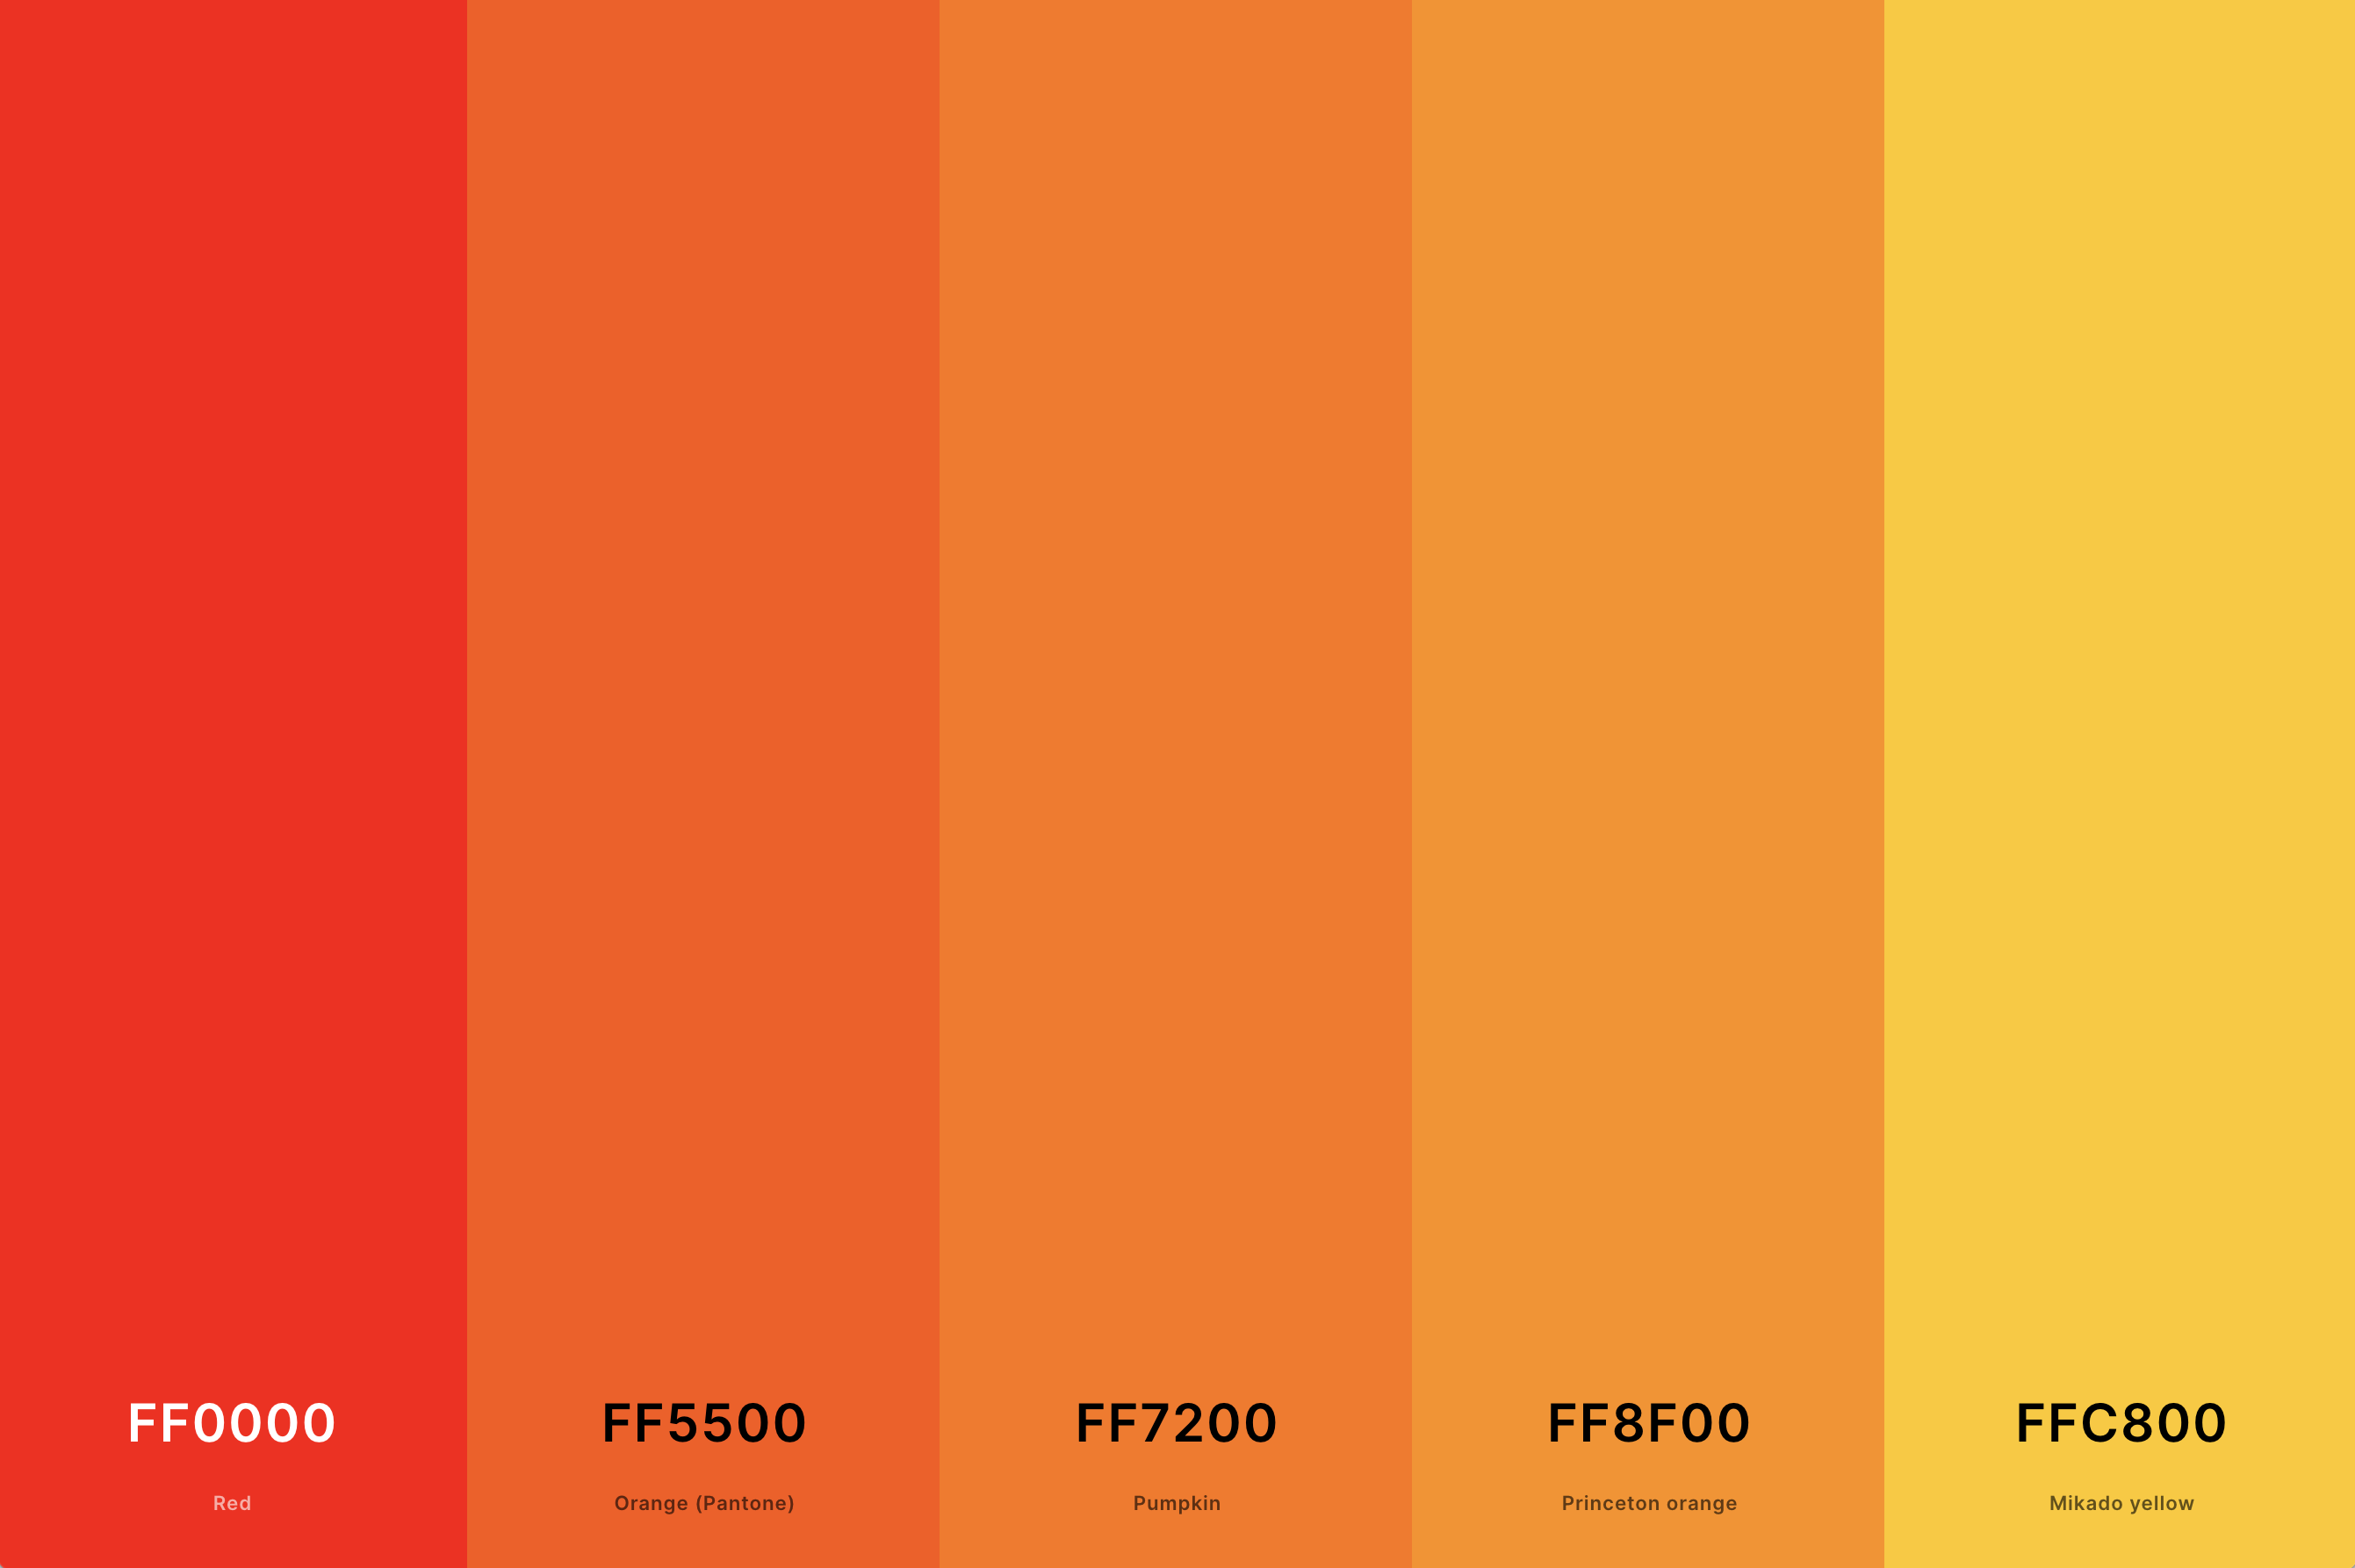 7. Orange And Red Color Palette Color Palette with Red (Hex #FF0000) + Orange (Pantone) (Hex #FF5500) + Pumpkin (Hex #FF7200) + Princeton Orange (Hex #FF8F00) + Mikado Yellow (Hex #FFC800) Color Palette with Hex Codes